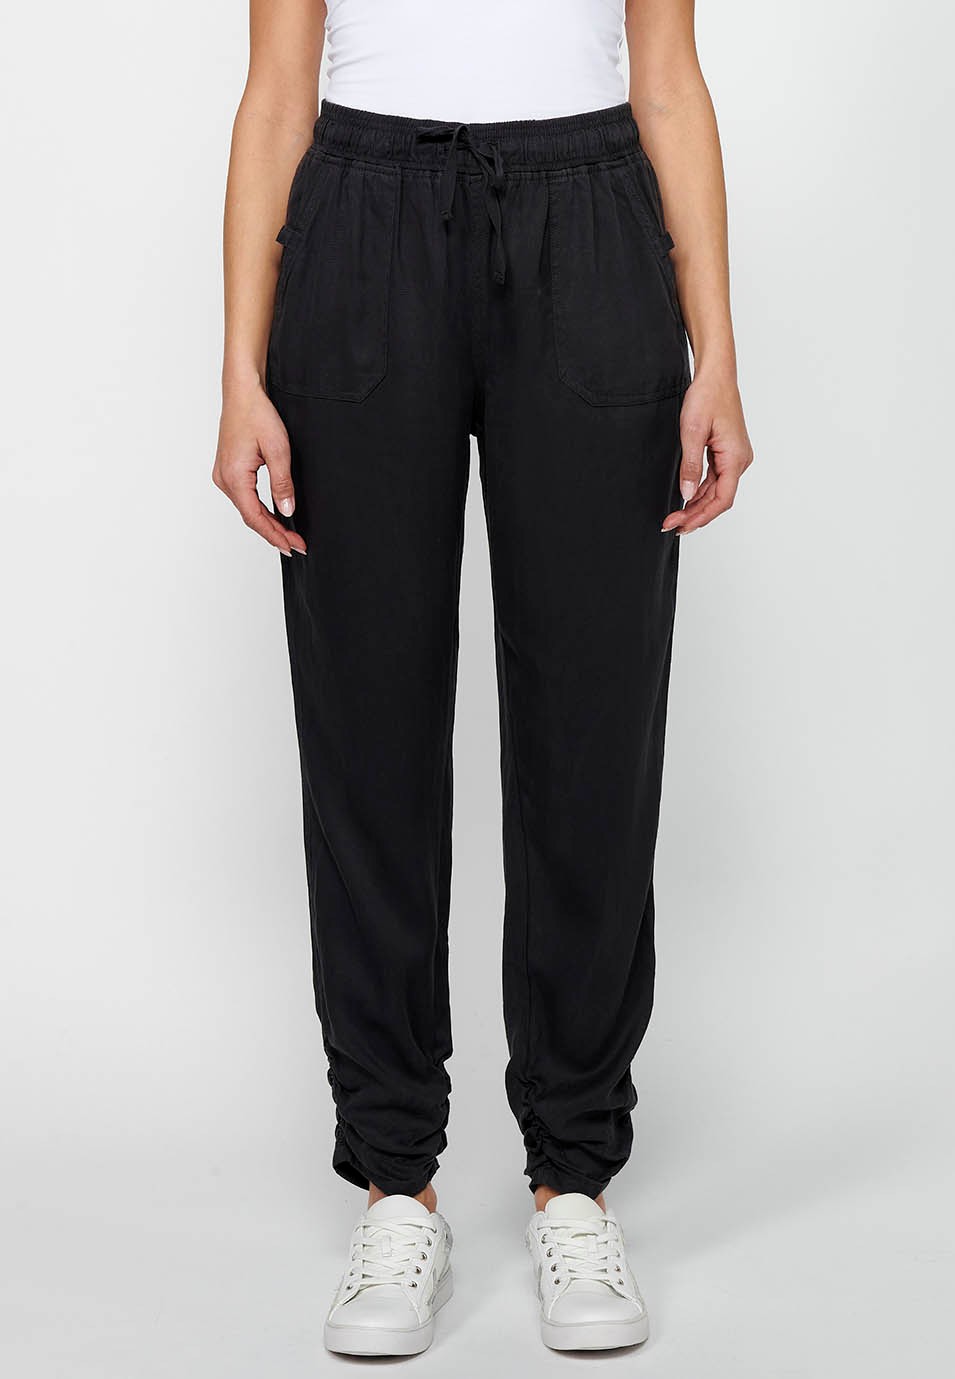 Long jogger pants with curled finish and rubberized waist with four pockets, two at the back with flap in Black for Women 4